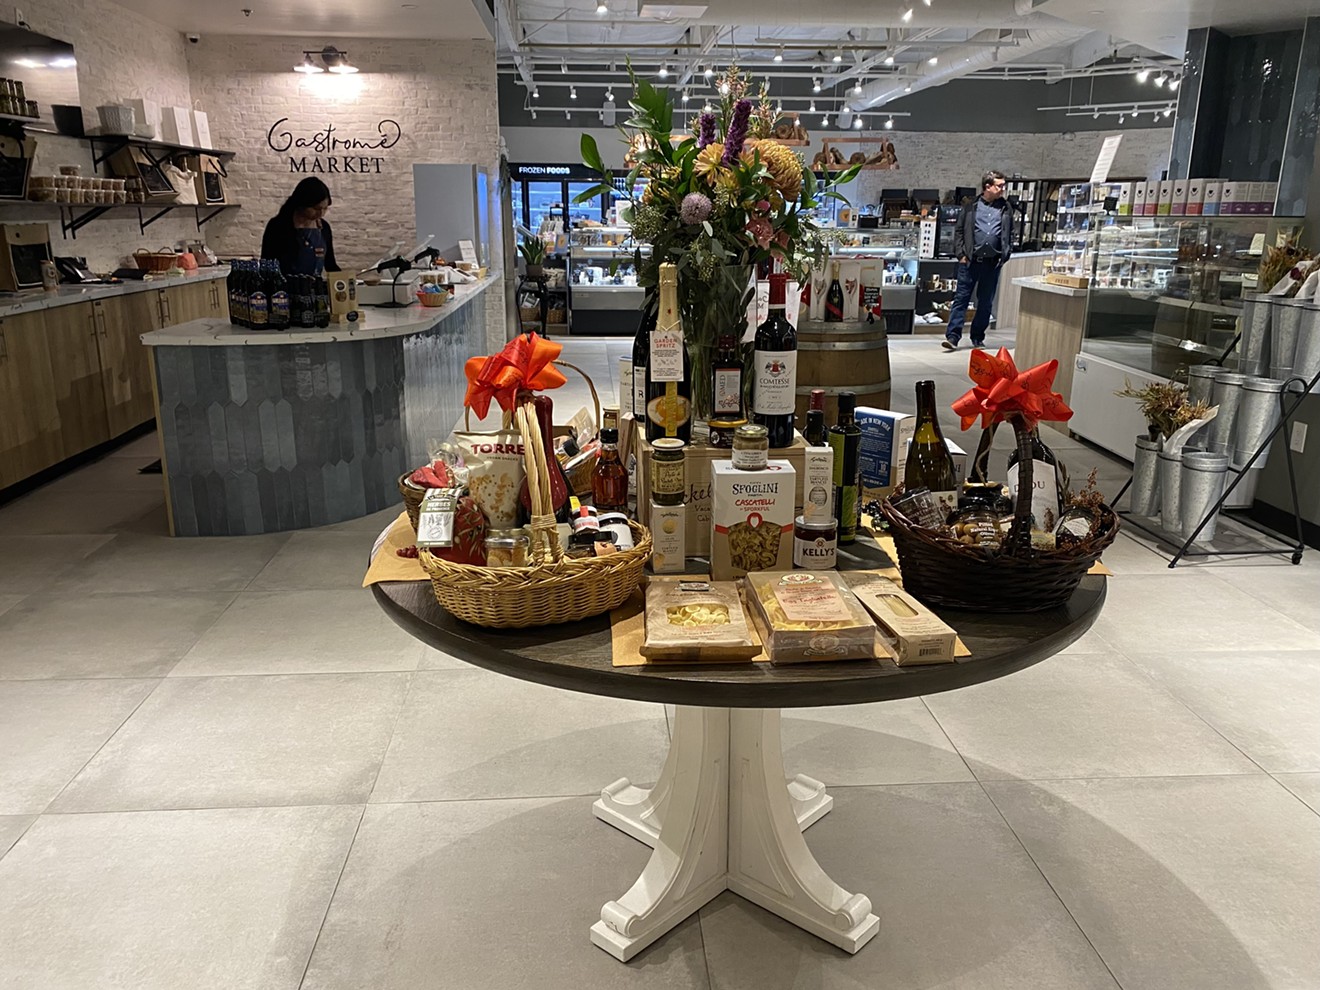 Gastromé Market sells a well-curated collection of gourmet goods.